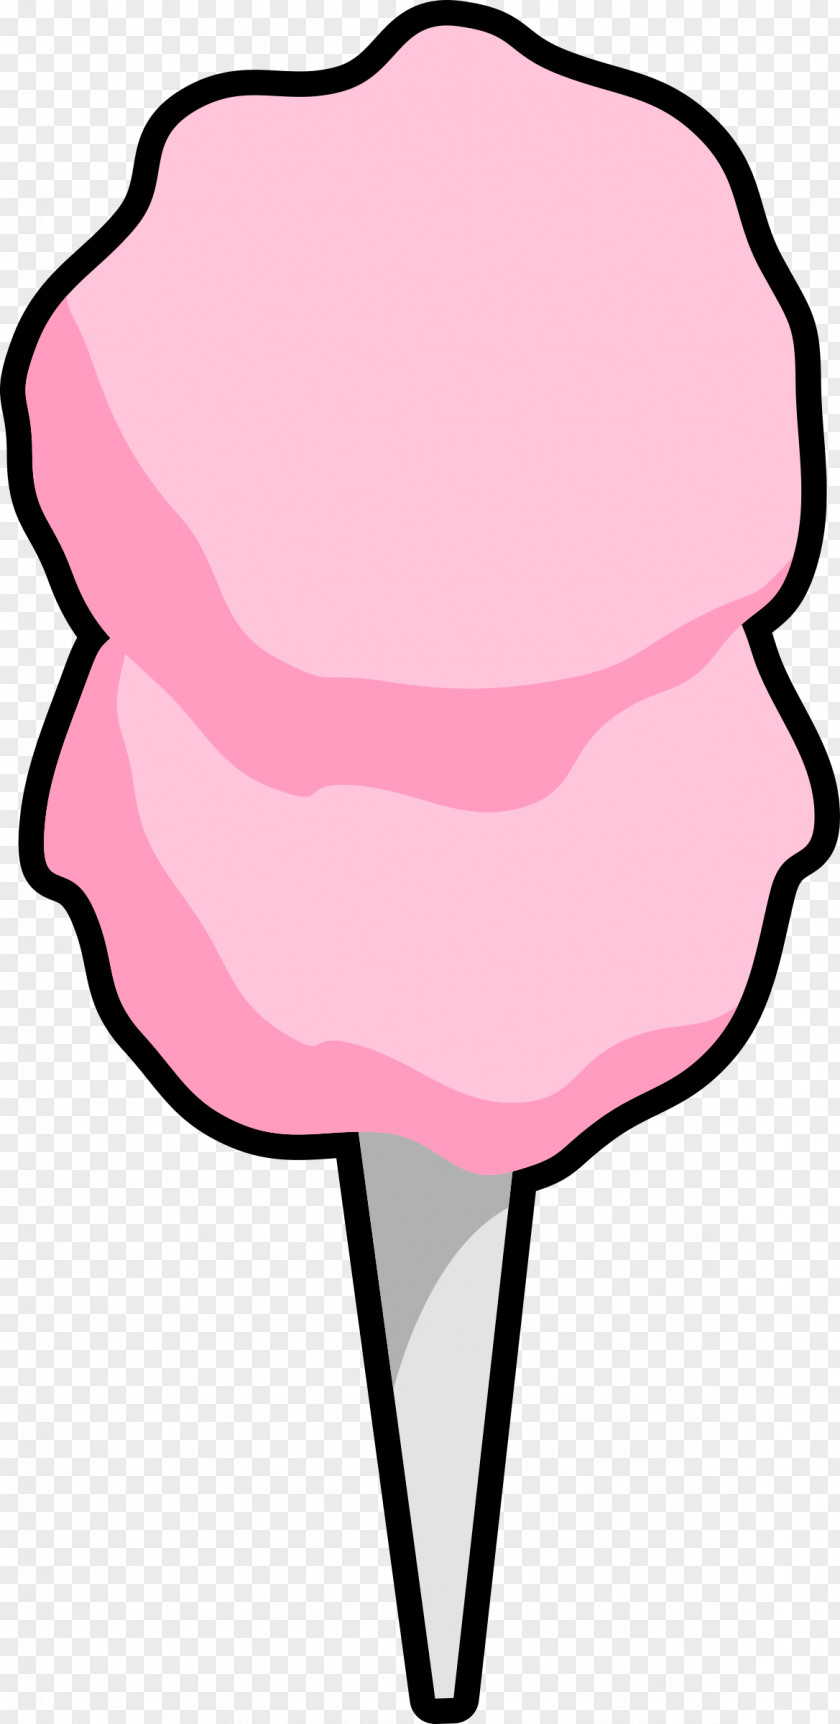 Candy Cotton Ice Cream Cake Clip Art PNG